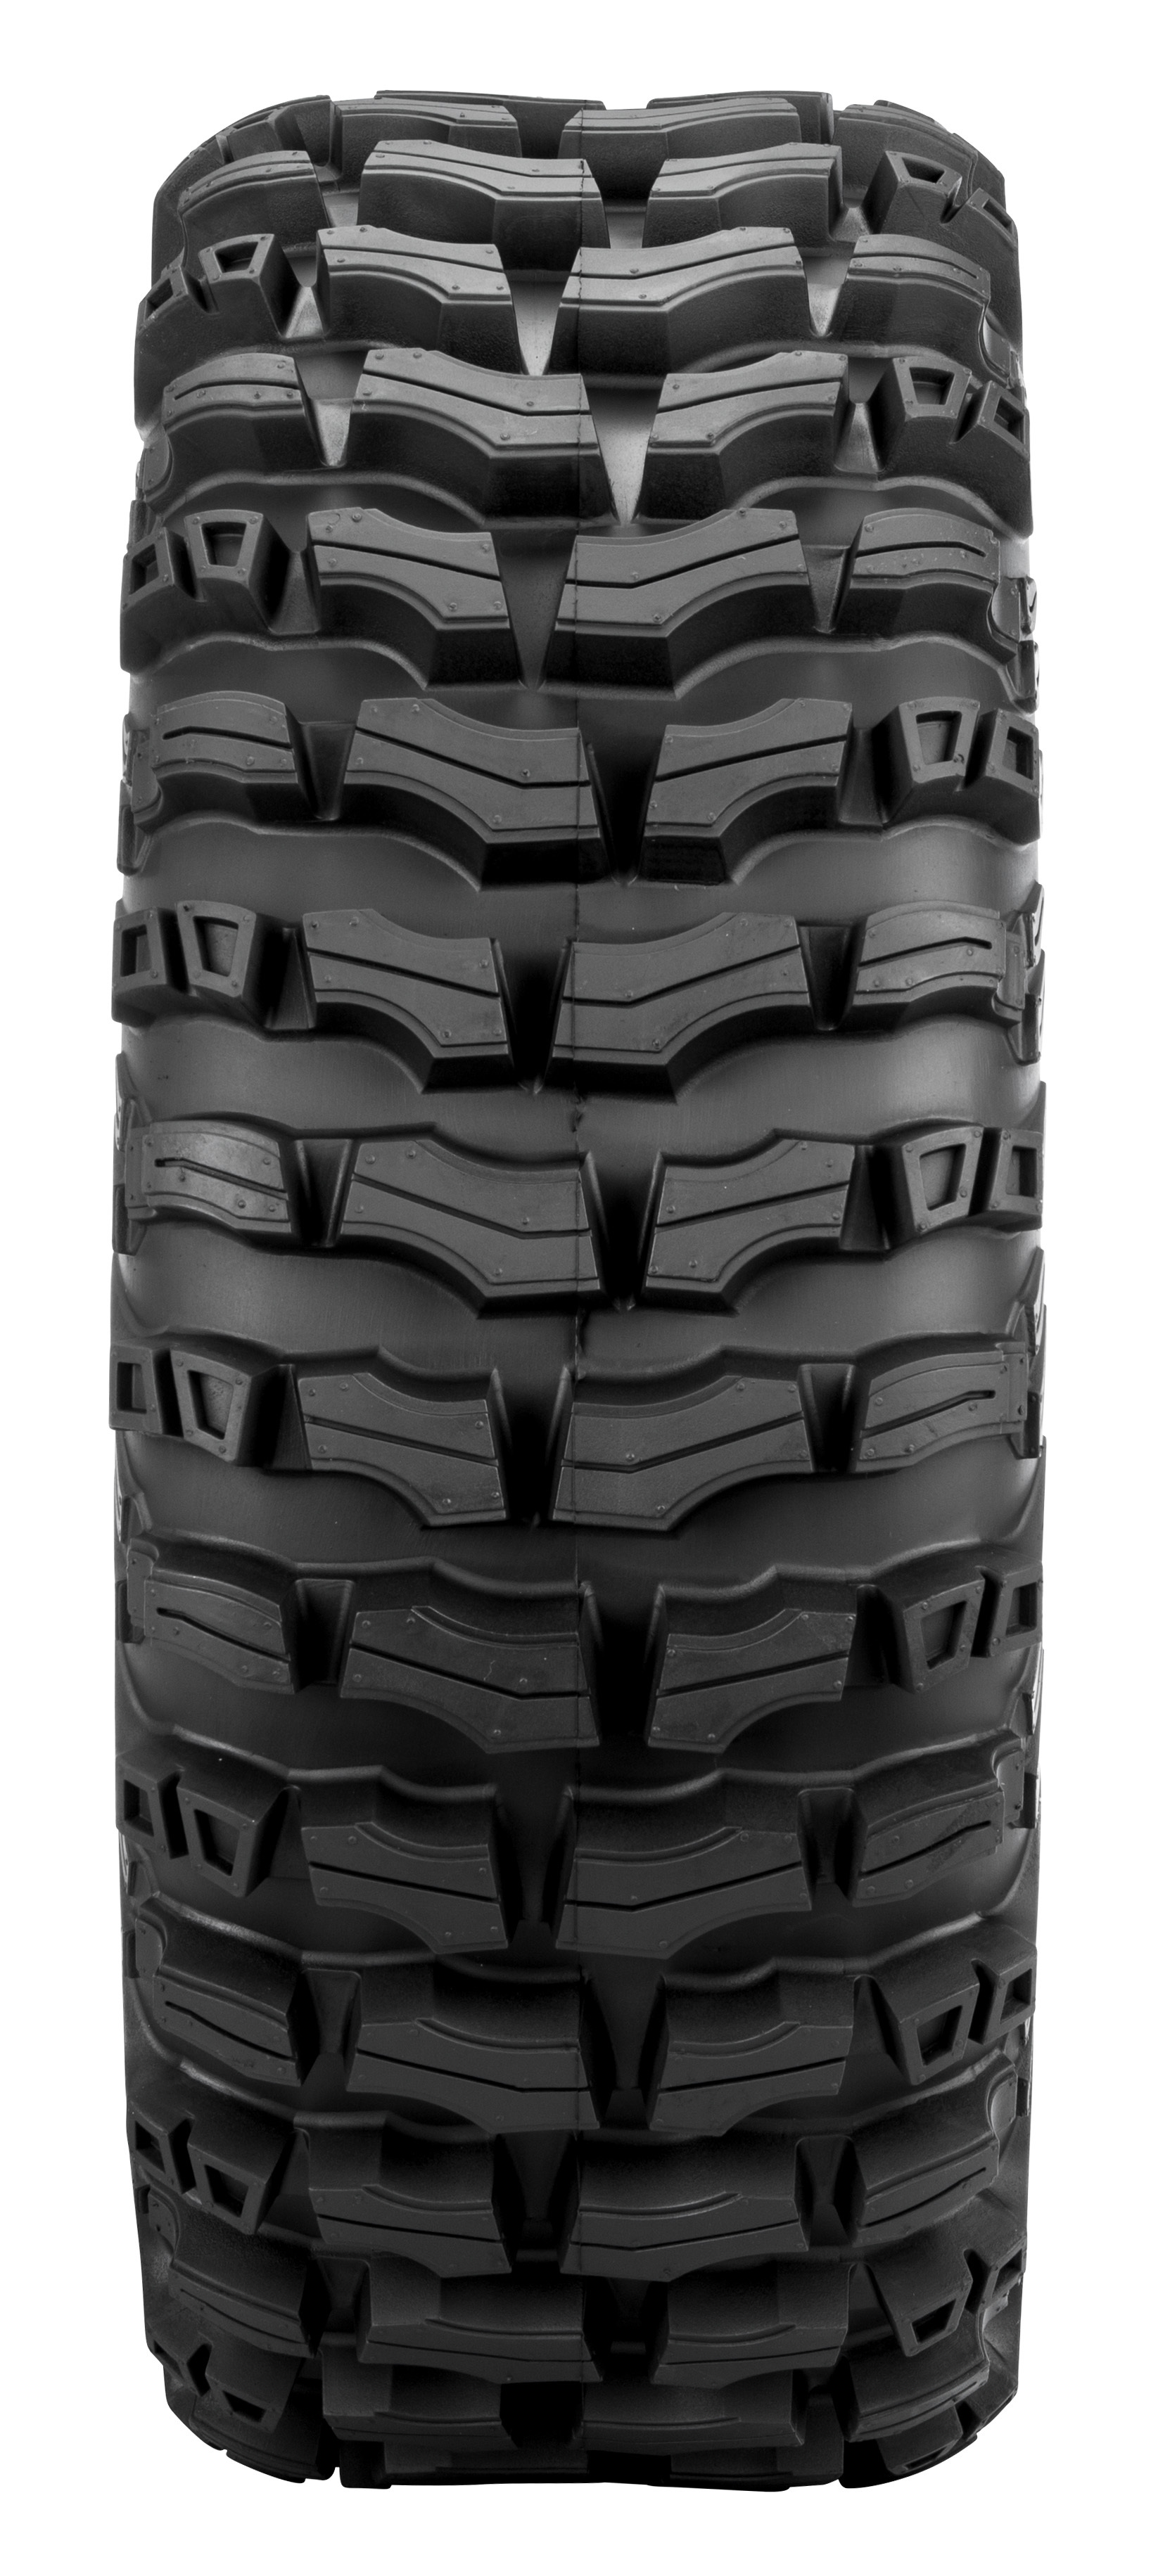 25X8Rx12 Buzz Saw R/T Tire - Click Image to Close